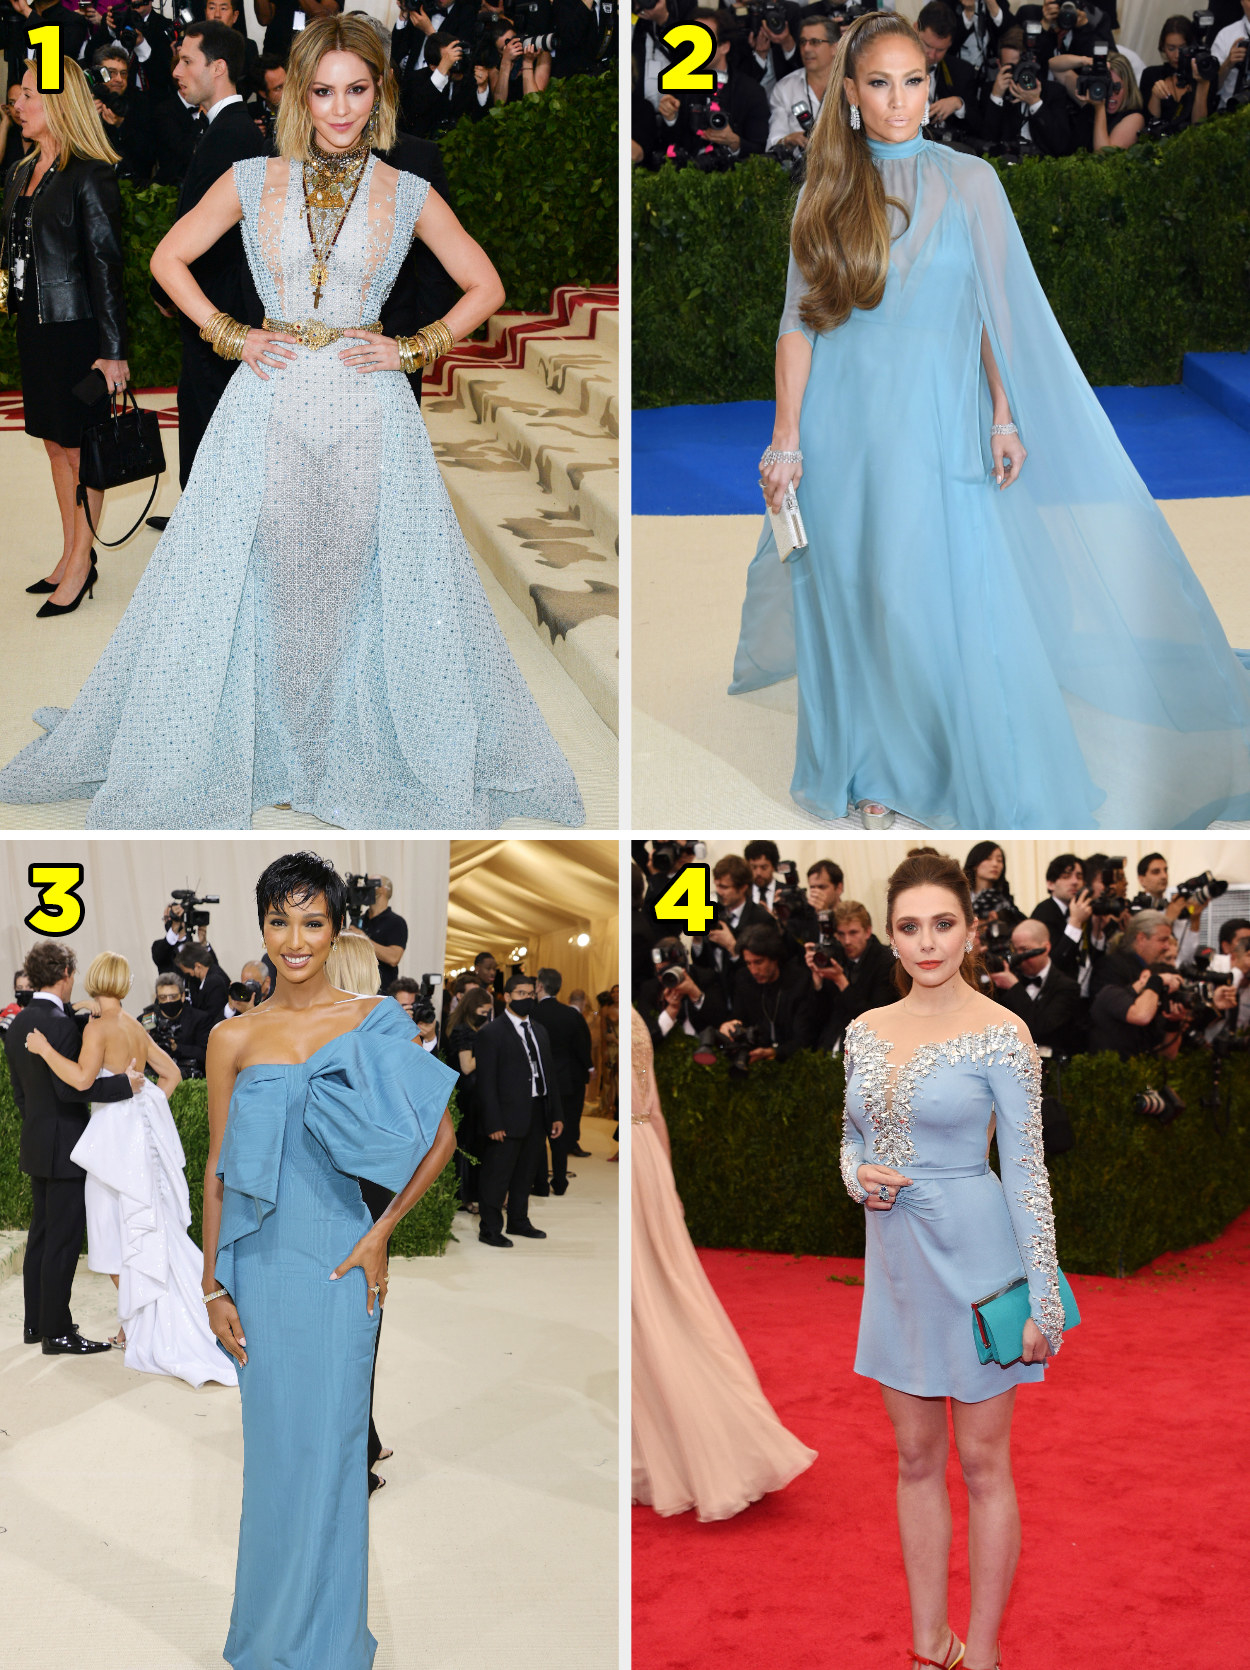 1. A sheer gown that imitates an upside down triangle with a pattern. 2. A long gown with a mock turtleneck and a cape. 3. A straight gown with a giant bow tied in the front. 4. A short dress with a jeweled neckline and sleeves.